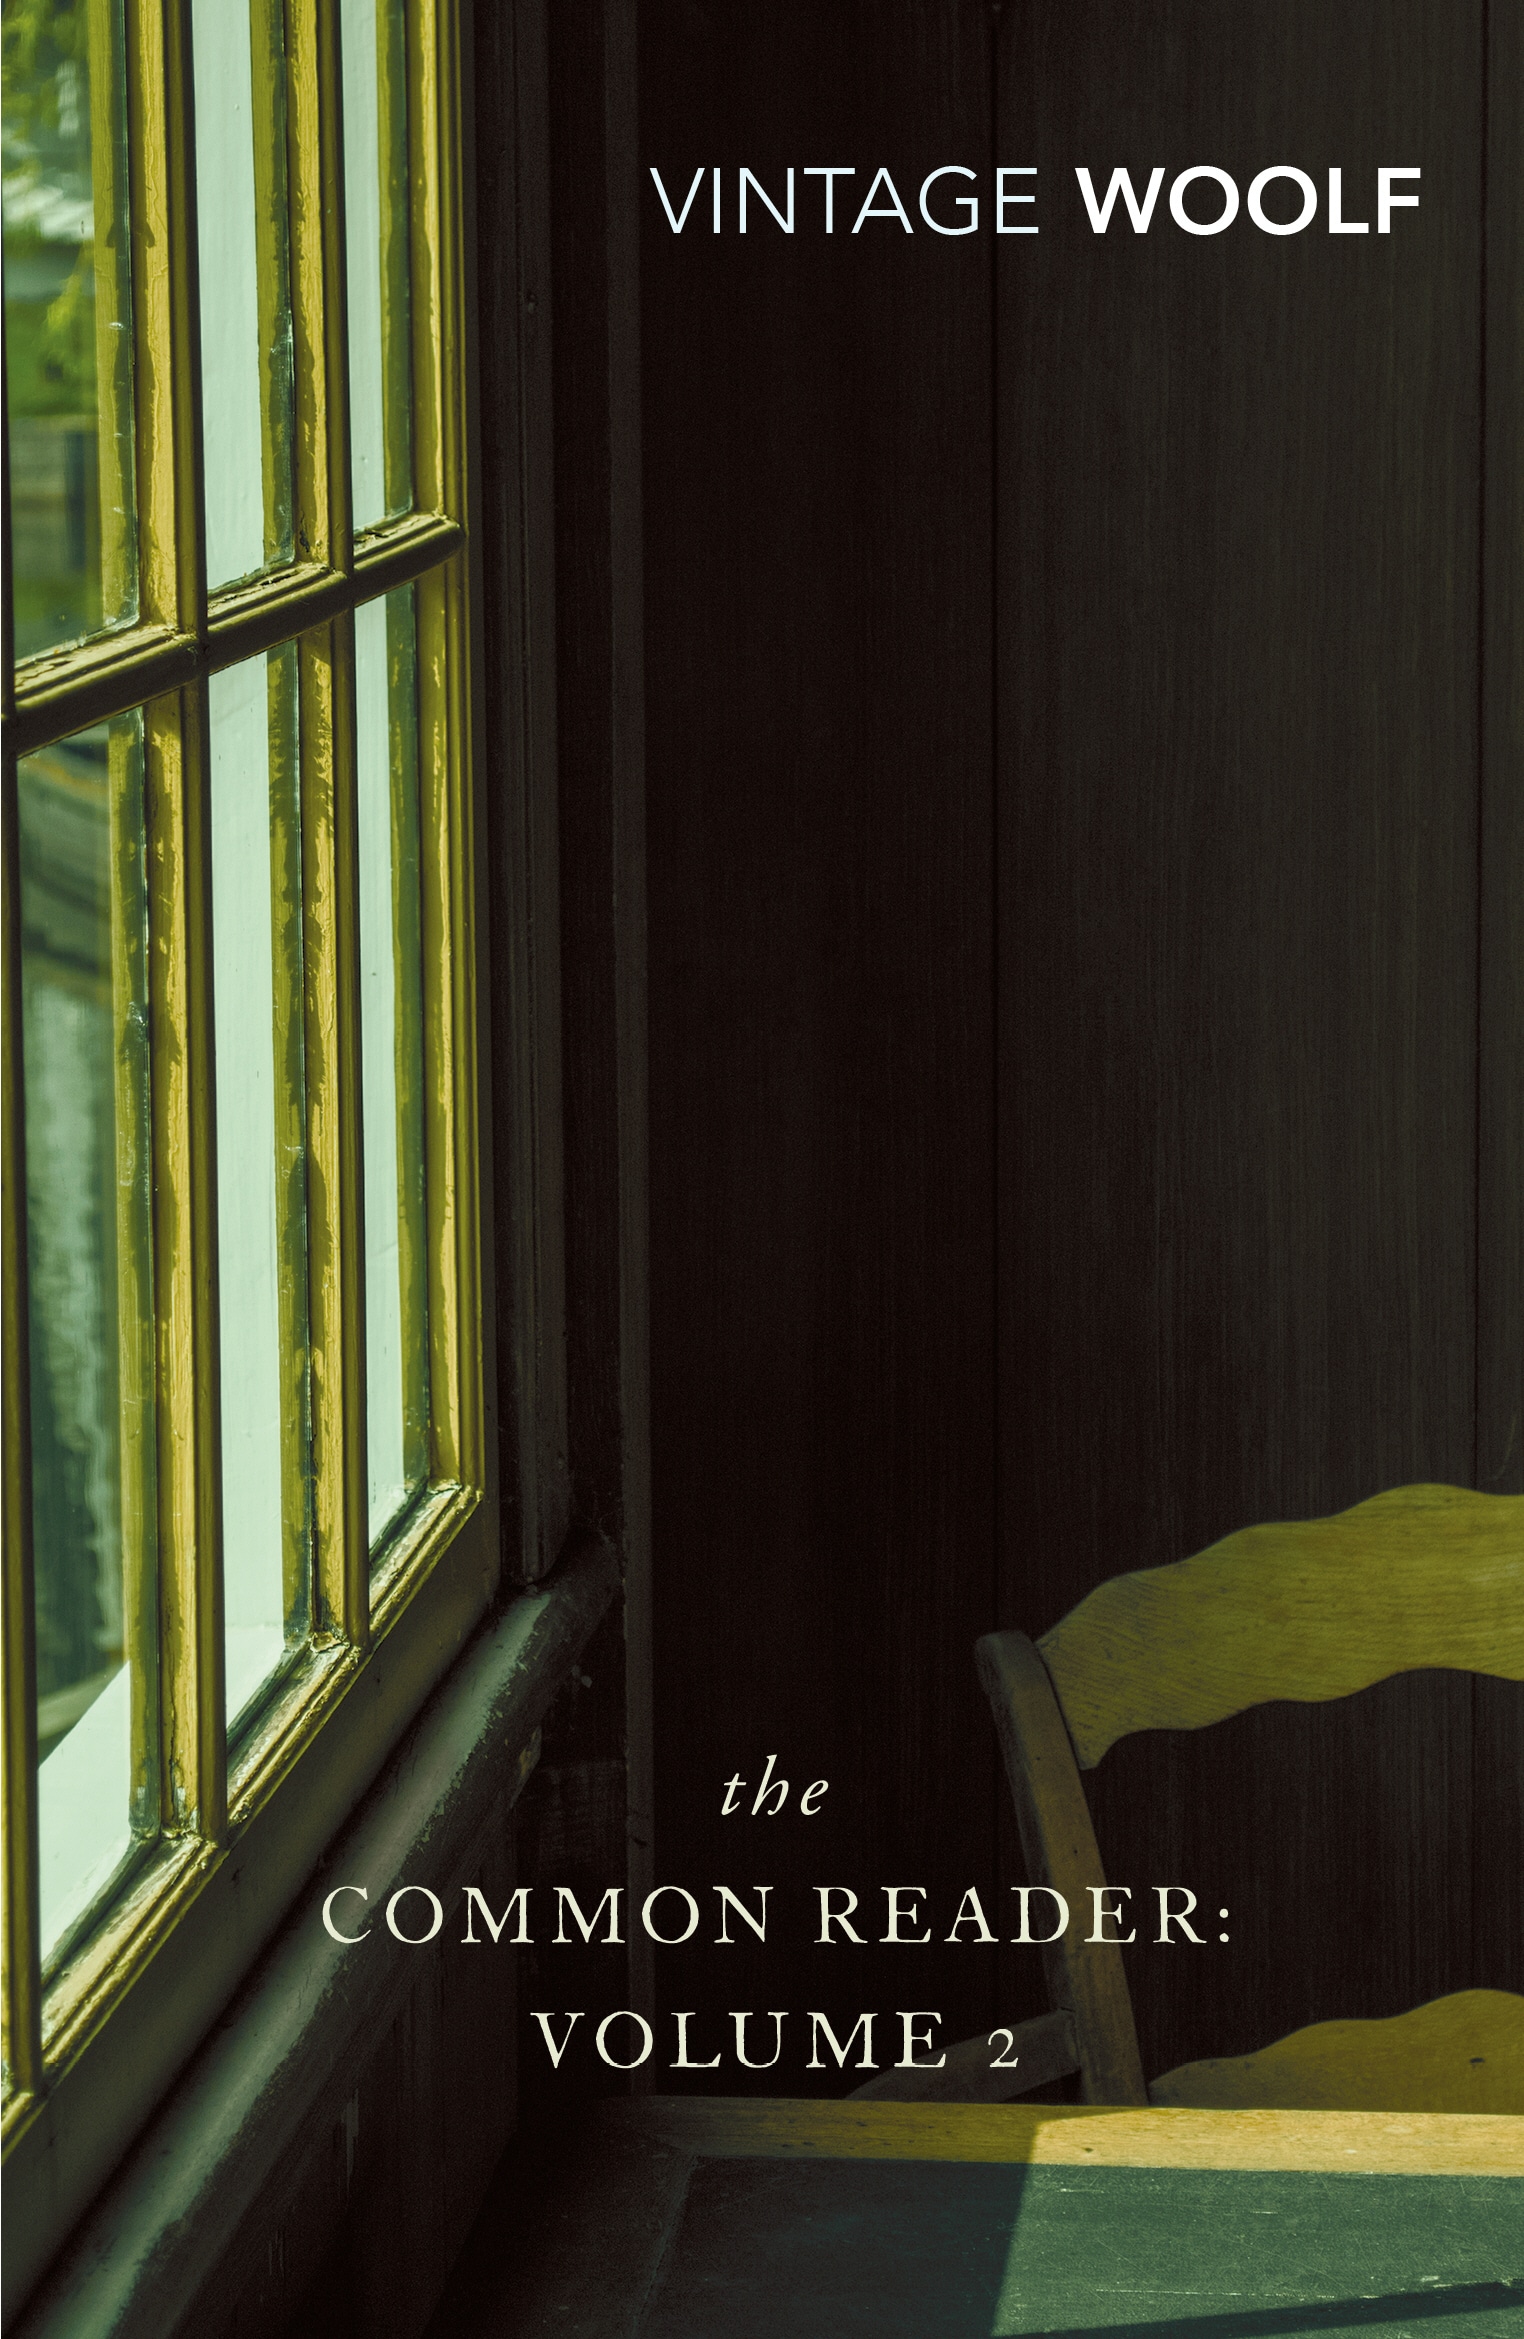 Book “The Common Reader: Volume 2” by Virginia Woolf — January 2, 2003